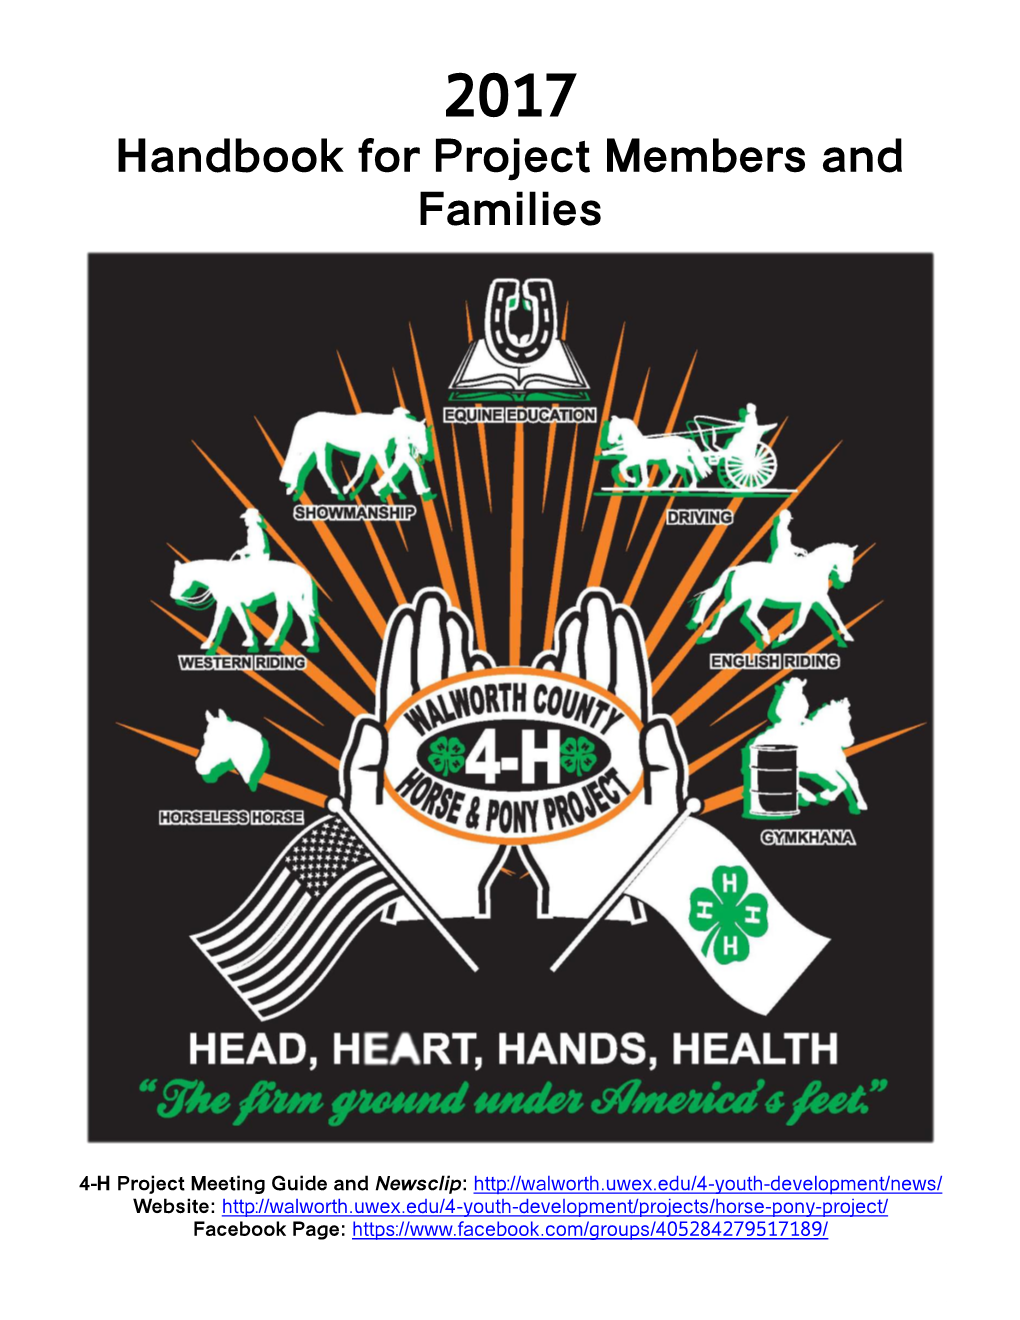 Handbook for Project Members and Families